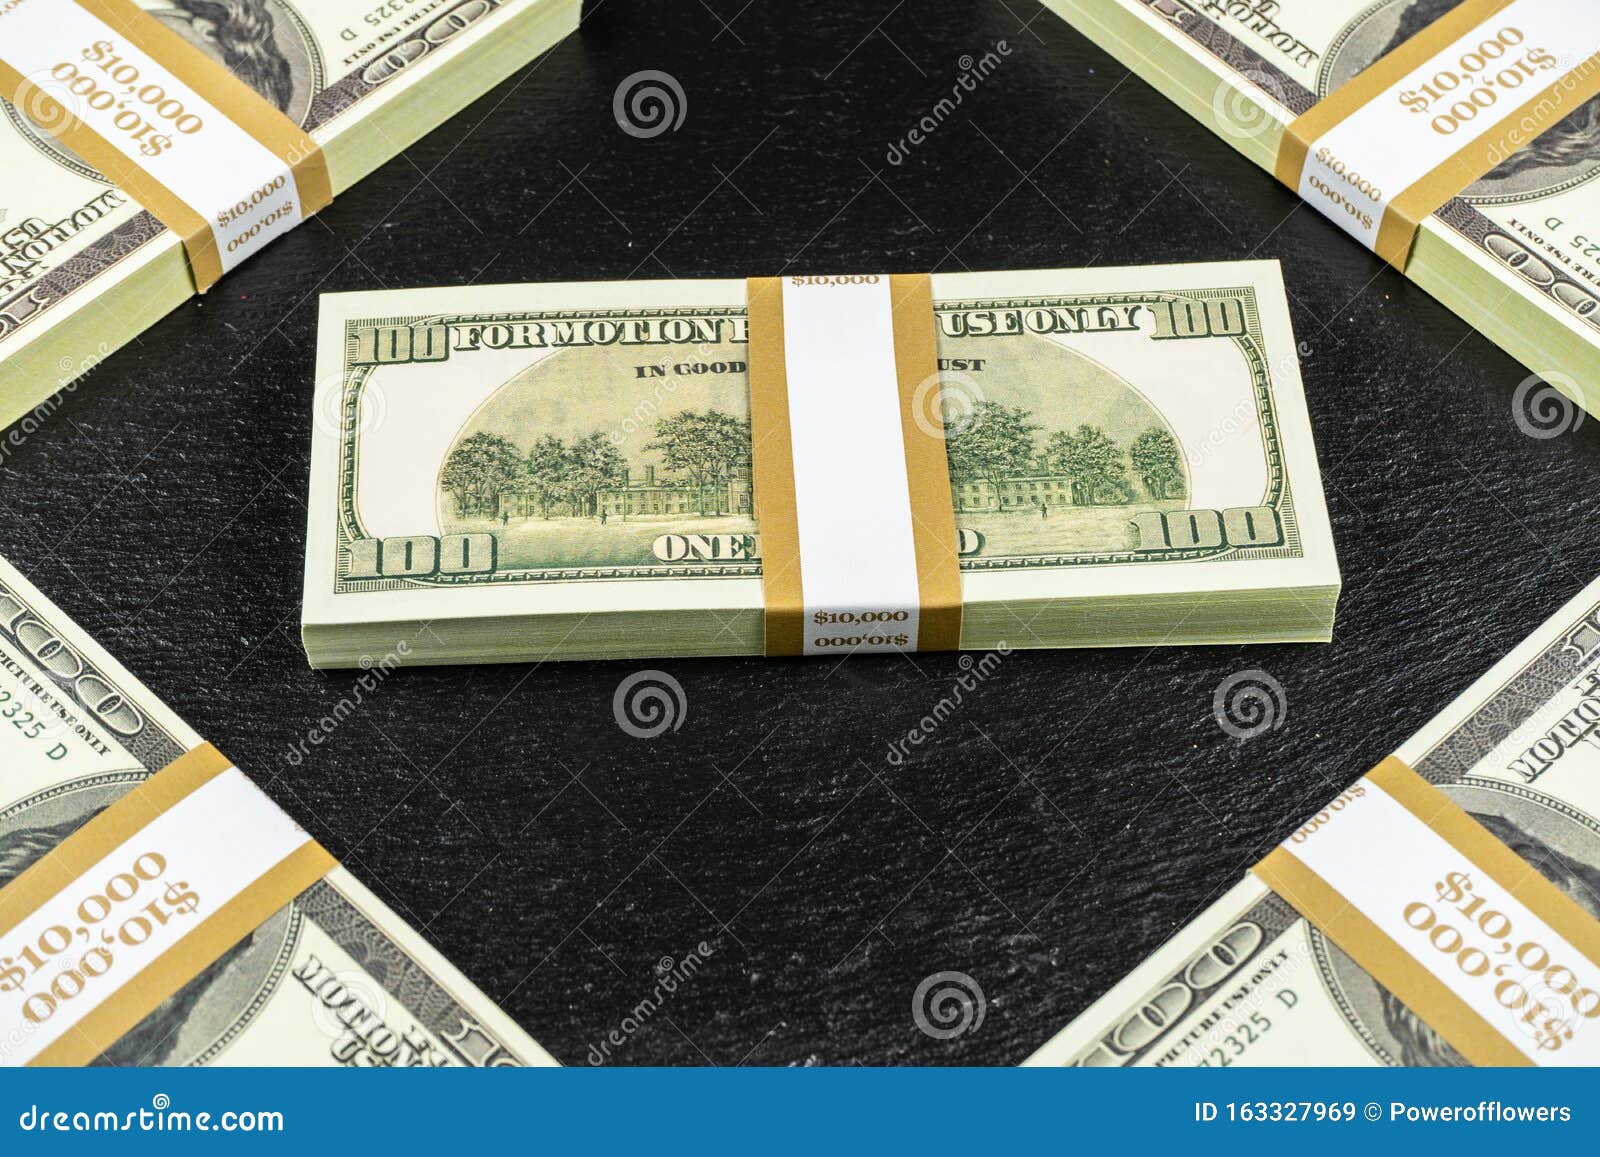 Montage 1000 Usd In 100 Notes Stock Photo - Download Image Now